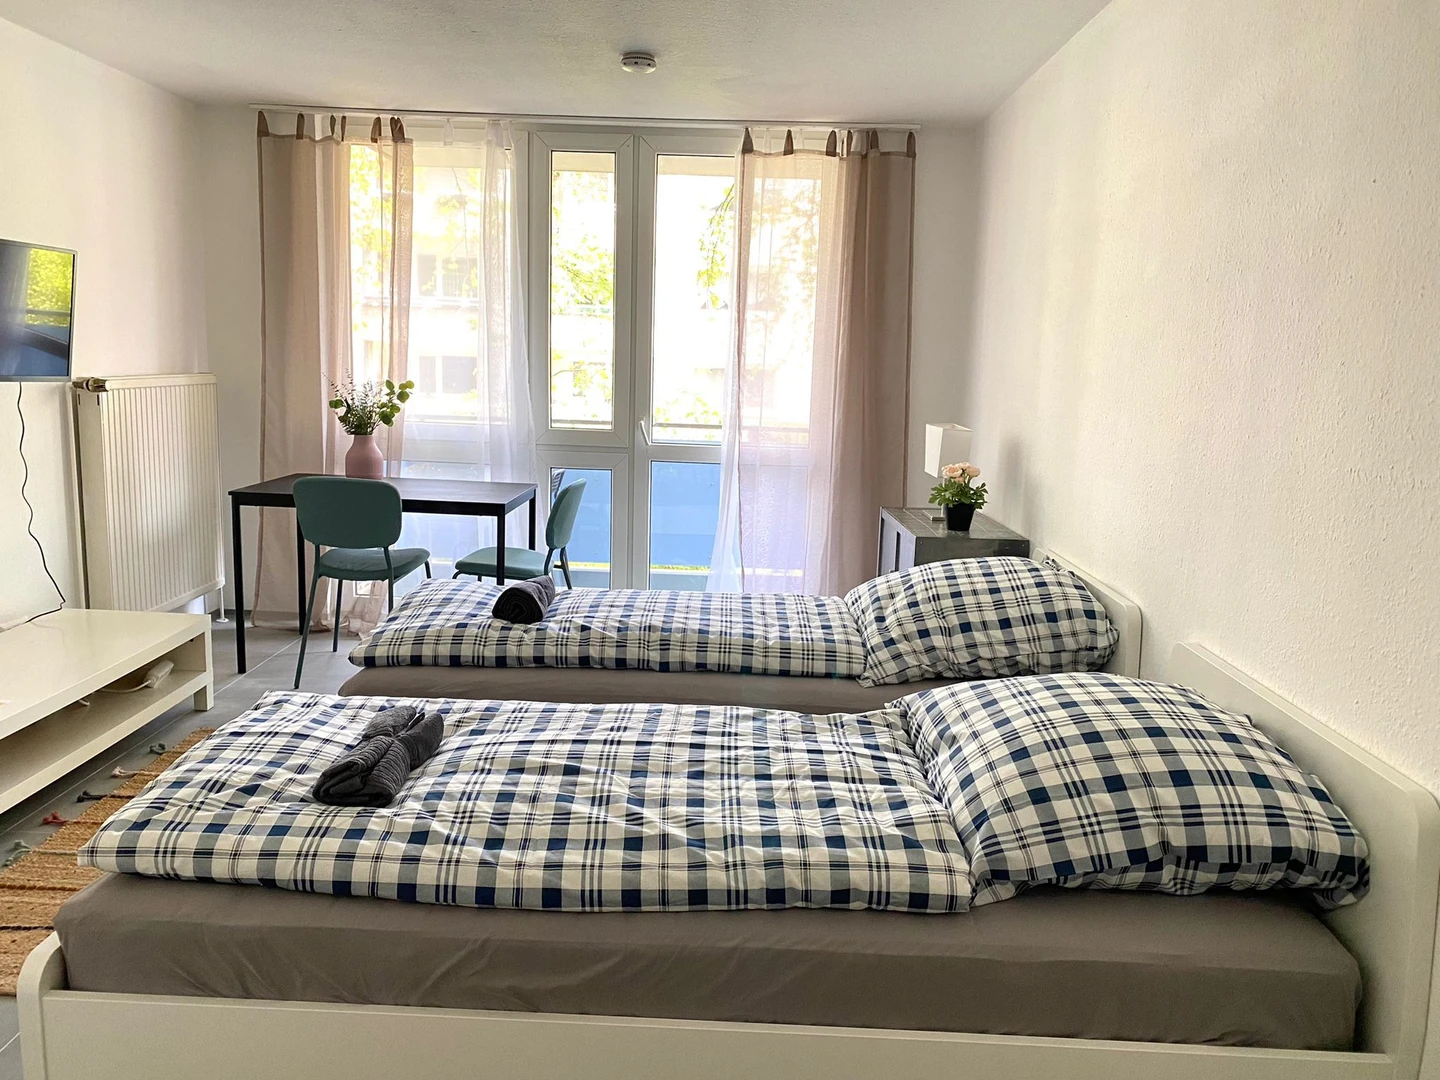 Room for rent with double bed Hanover